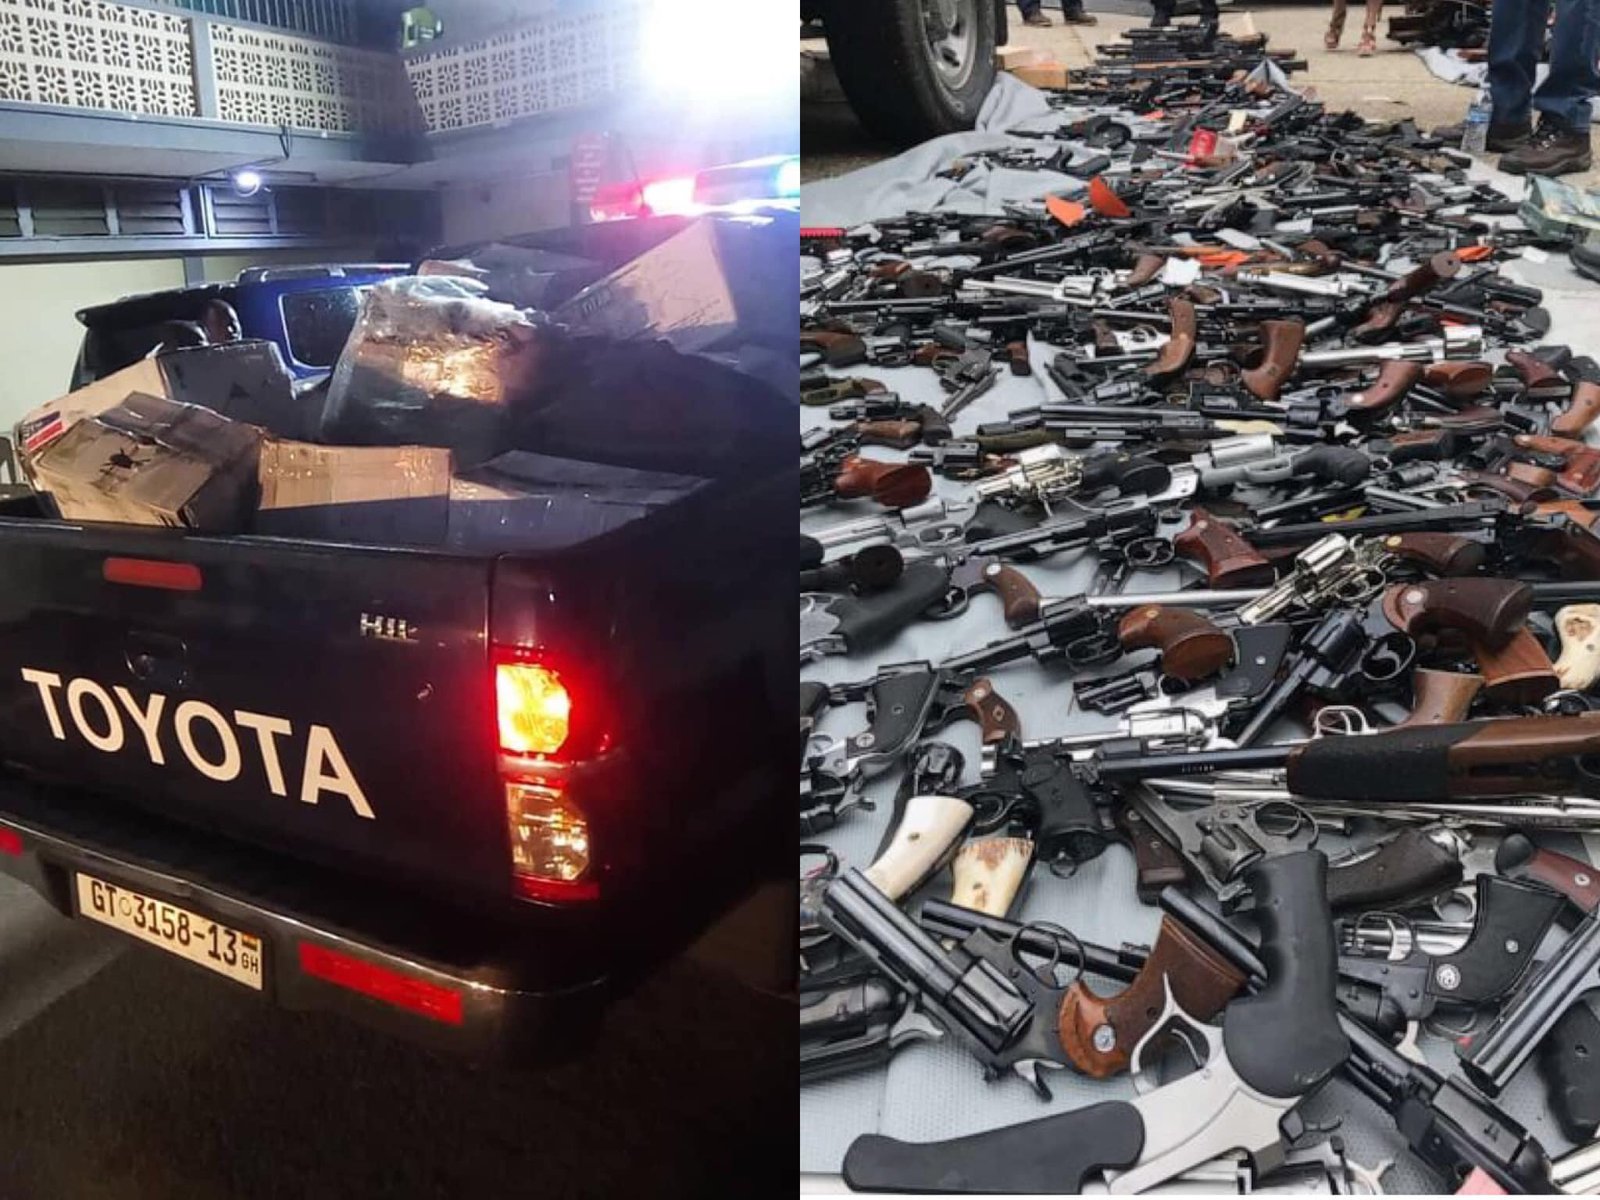 Weapons seized at Tema port miraculously turns out to be gas pistols – Police reveals